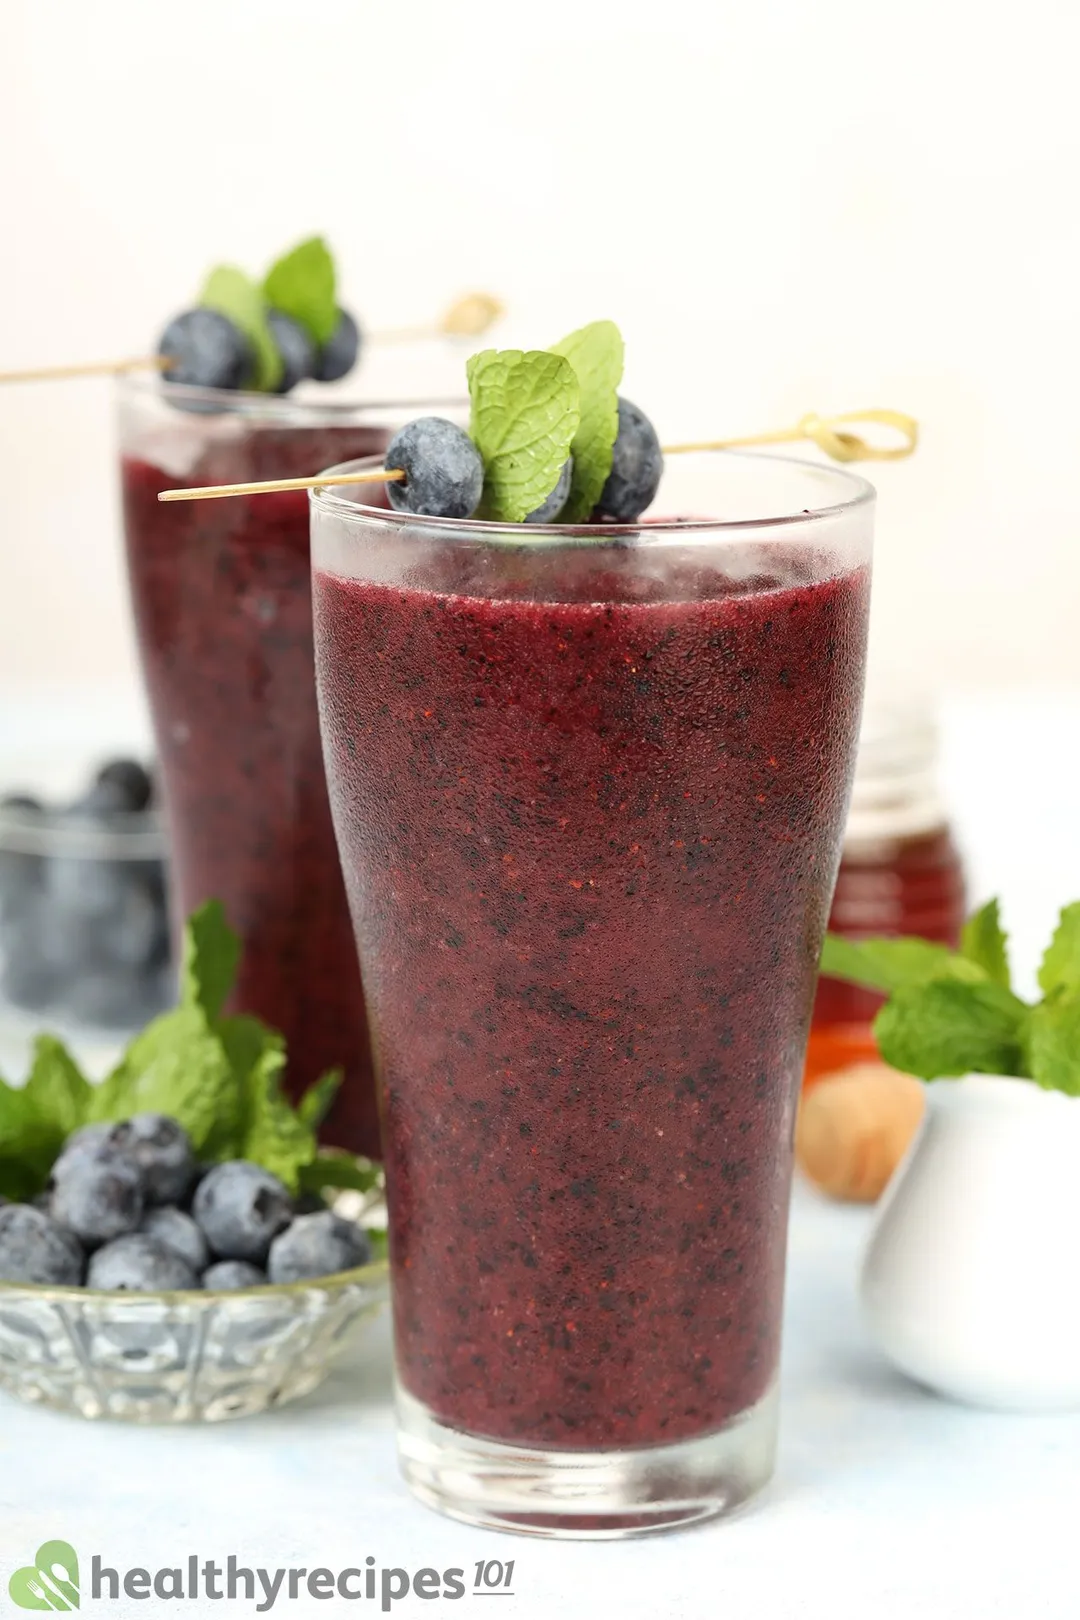 Two glasses of blueberry smoothie garnished with blueberry skewers and placed near small plates of blueberries and a small jar of honey.